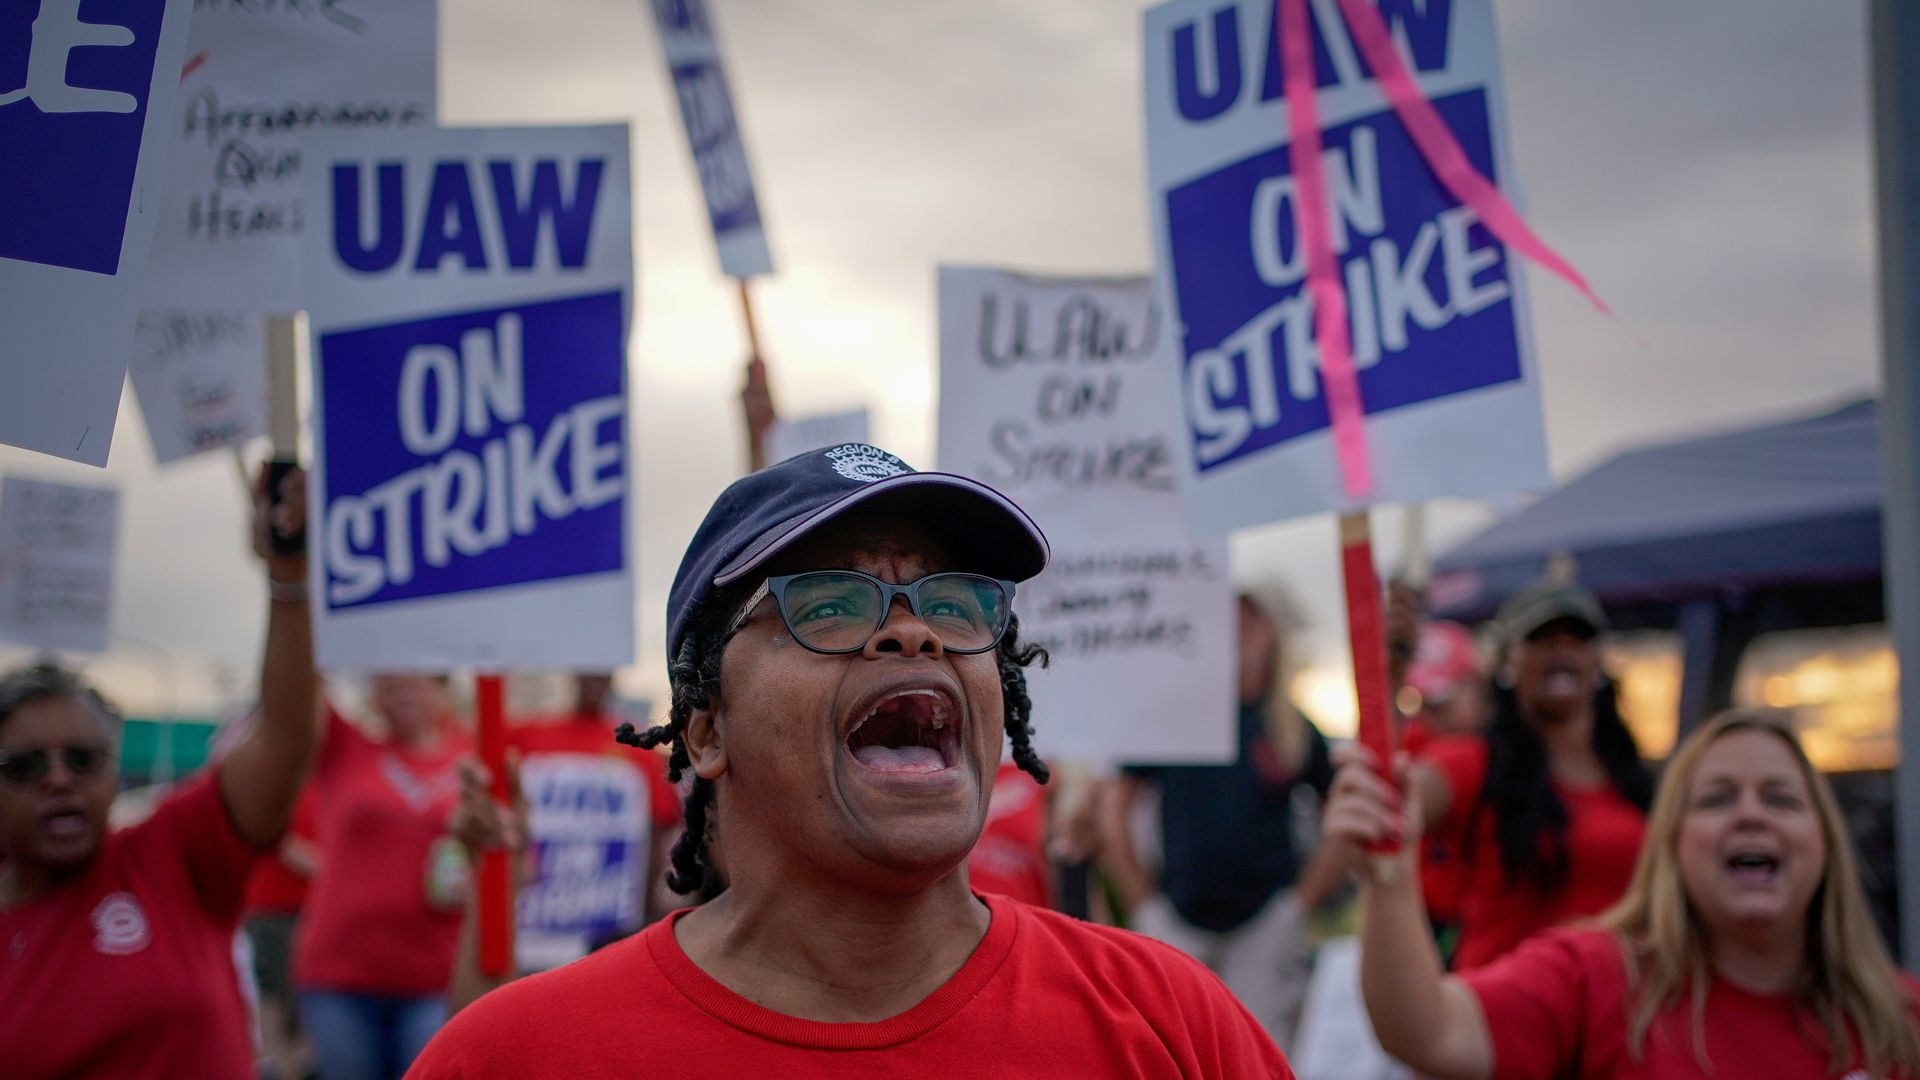 In this image, a woman shouts while standing in front of people holding signs that say "UAW strike" 